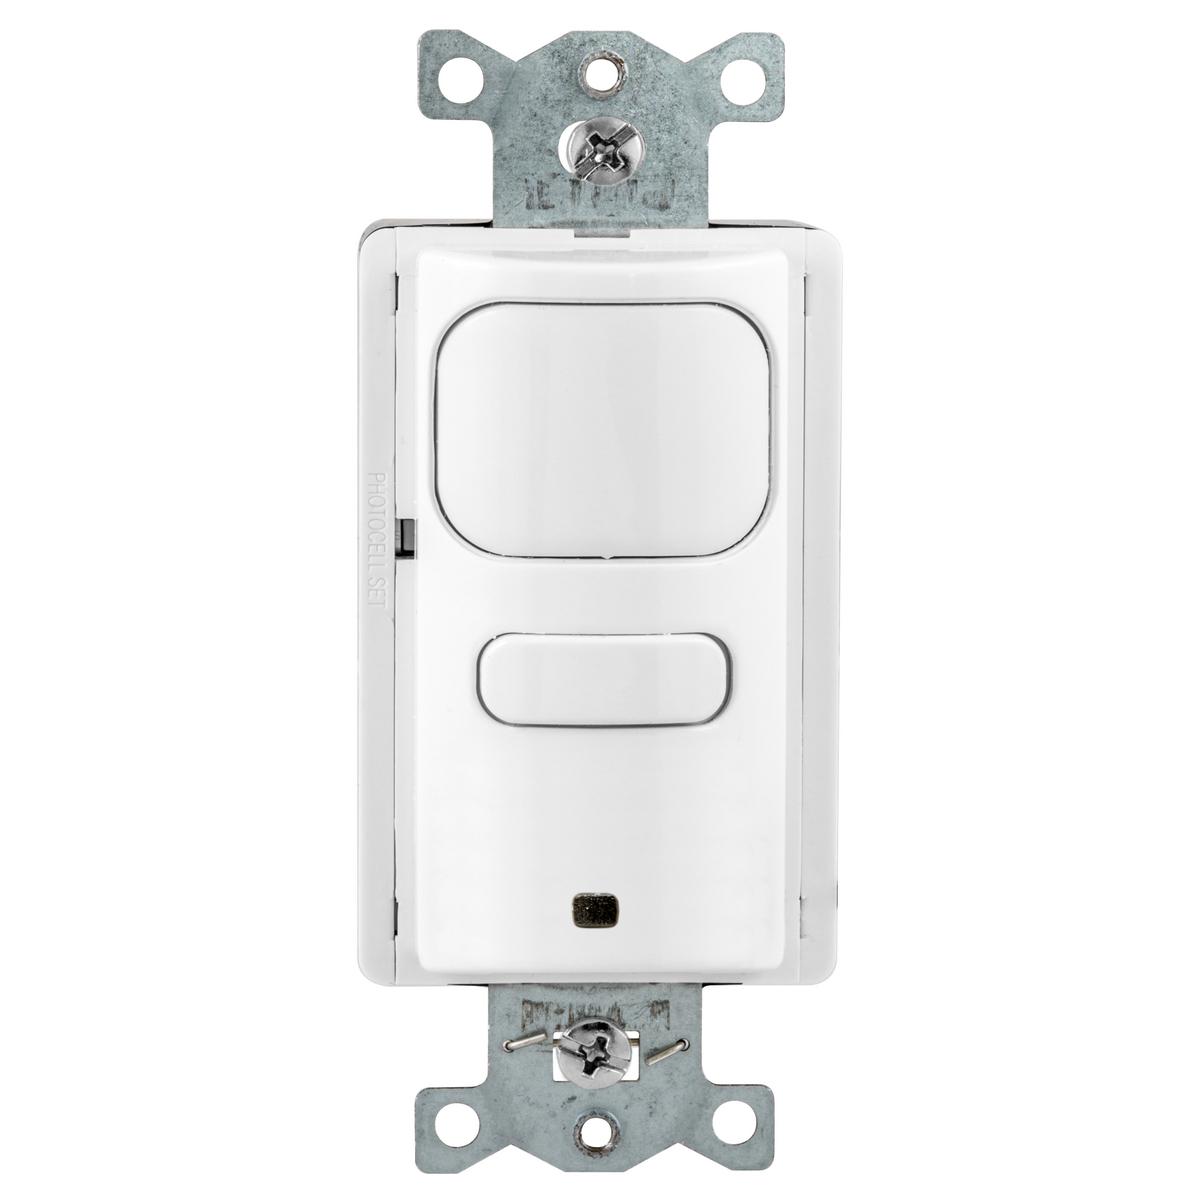 Hubbell AP2001W1 Occupancy Sensing Products, Wall Switch,Occupancy or V ACancy, Passive Infrared, 1 Relay, 1000 Square Feet,800WIncandescent, 1000W Fluorescent @ 120V AC, 1800W Fluorescent @ 277VAC,120/277V AC, With Photocell, White 